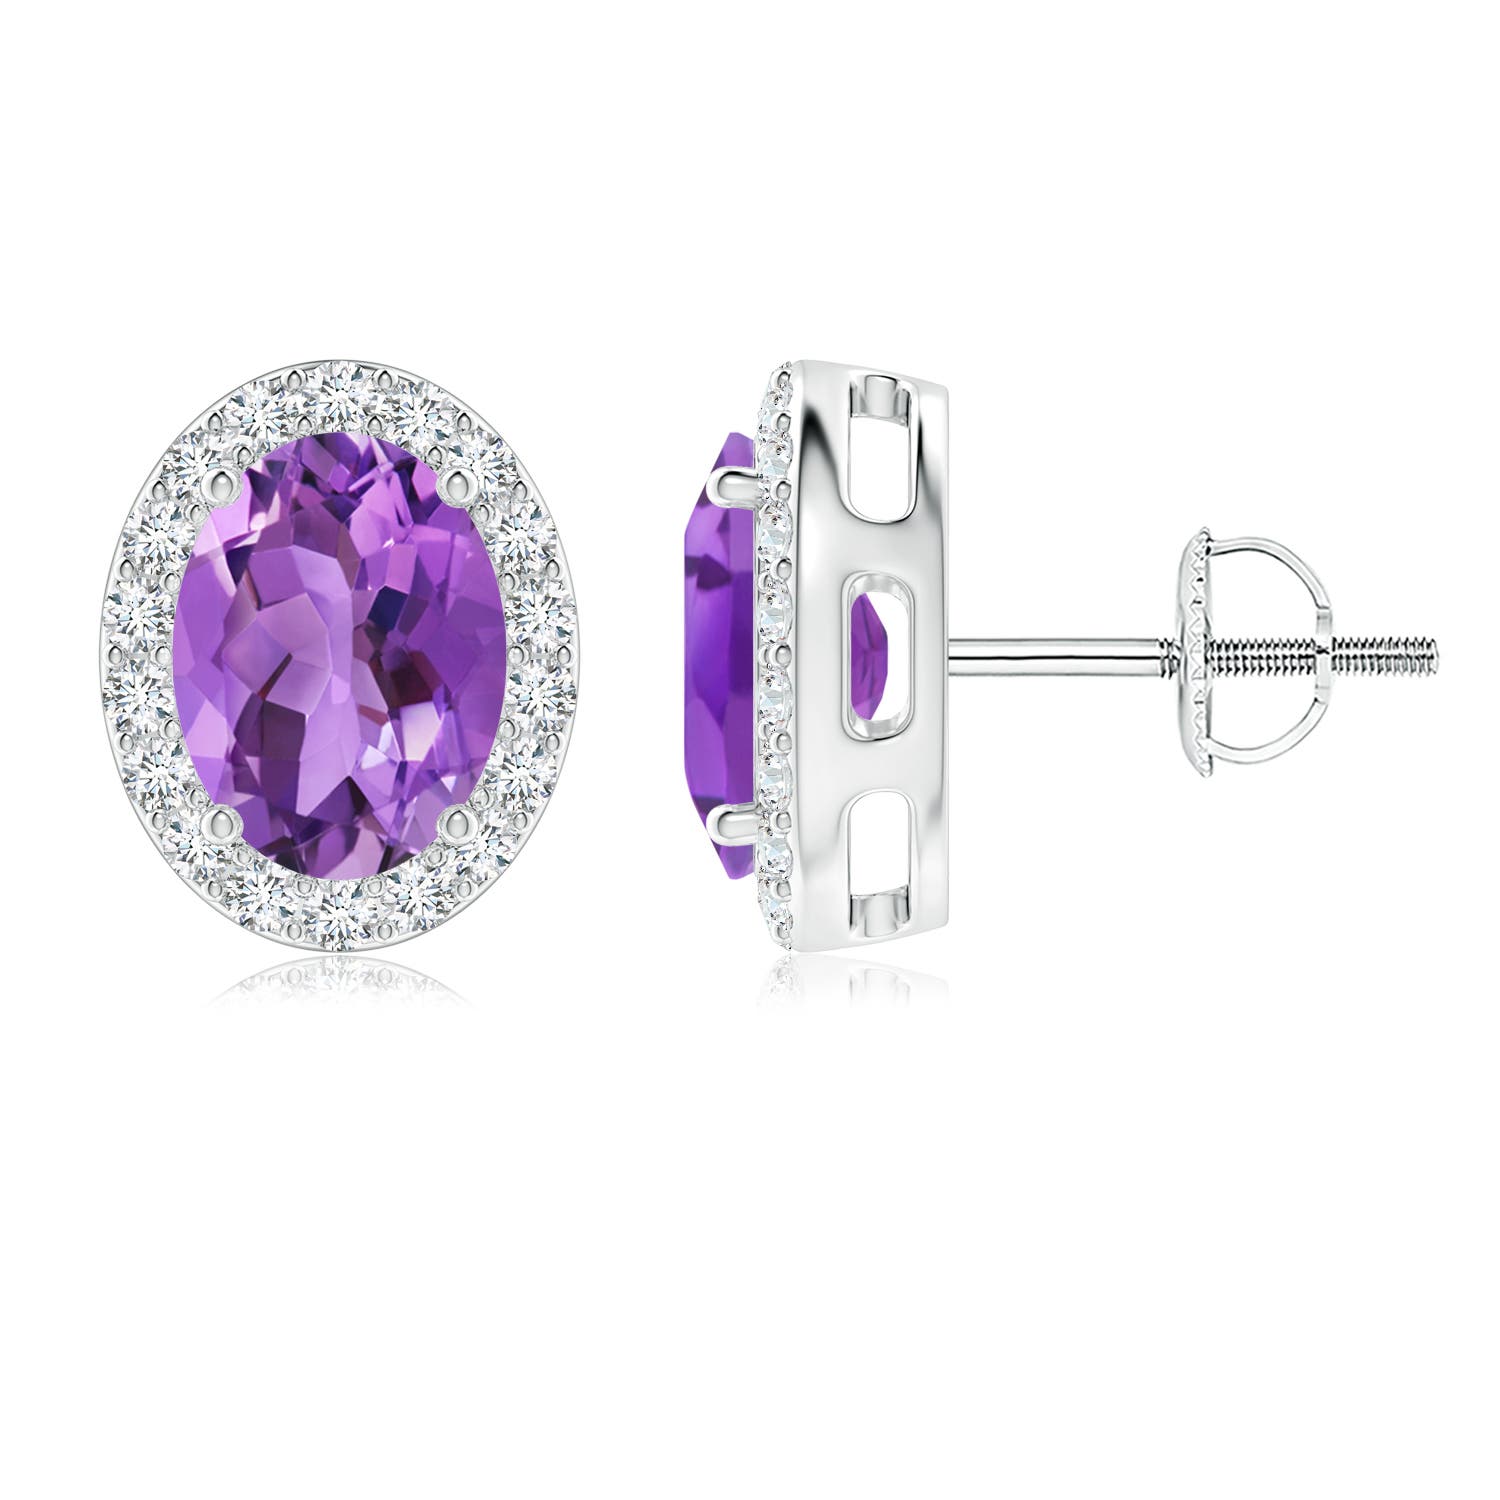 AA - Amethyst / 2.66 CT / 14 KT White Gold